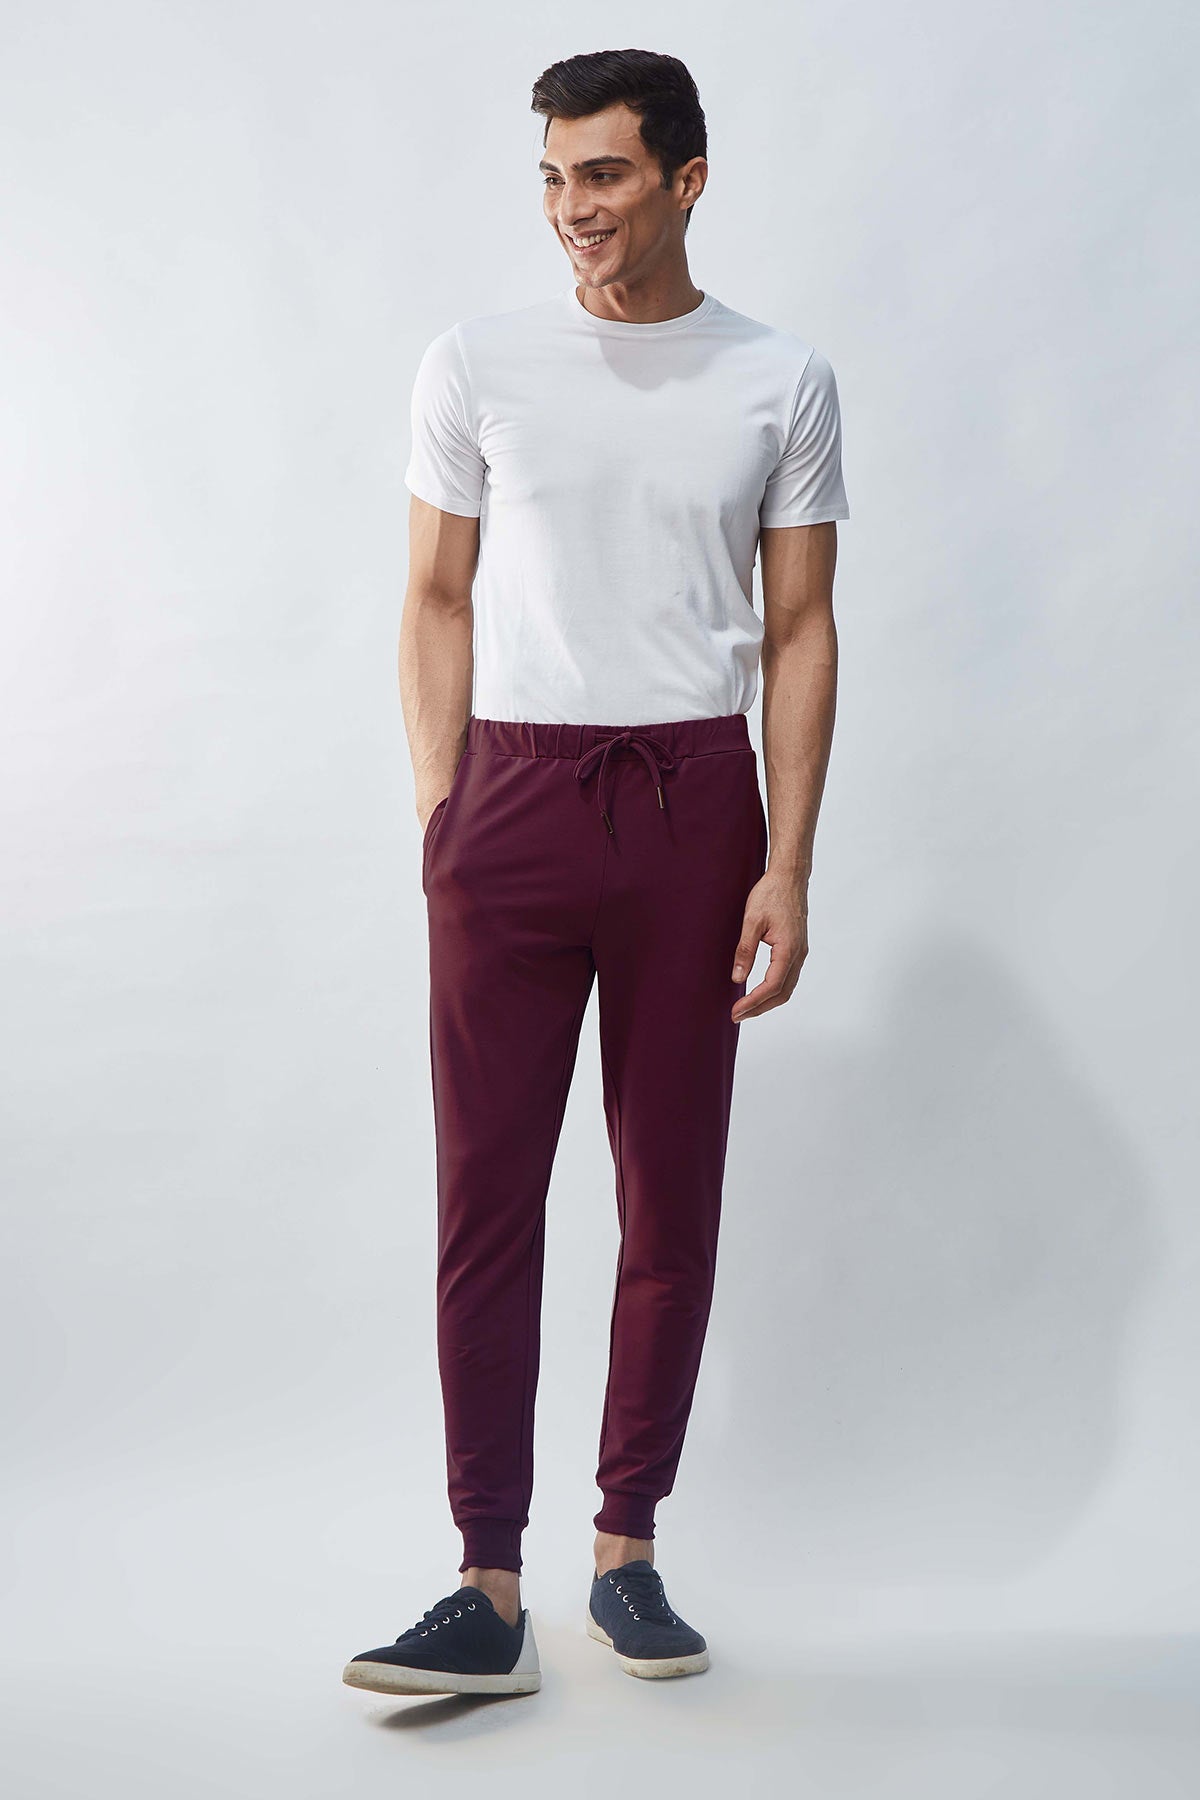 Latest Beyours Trousers & Lowers arrivals - Men - 2 products